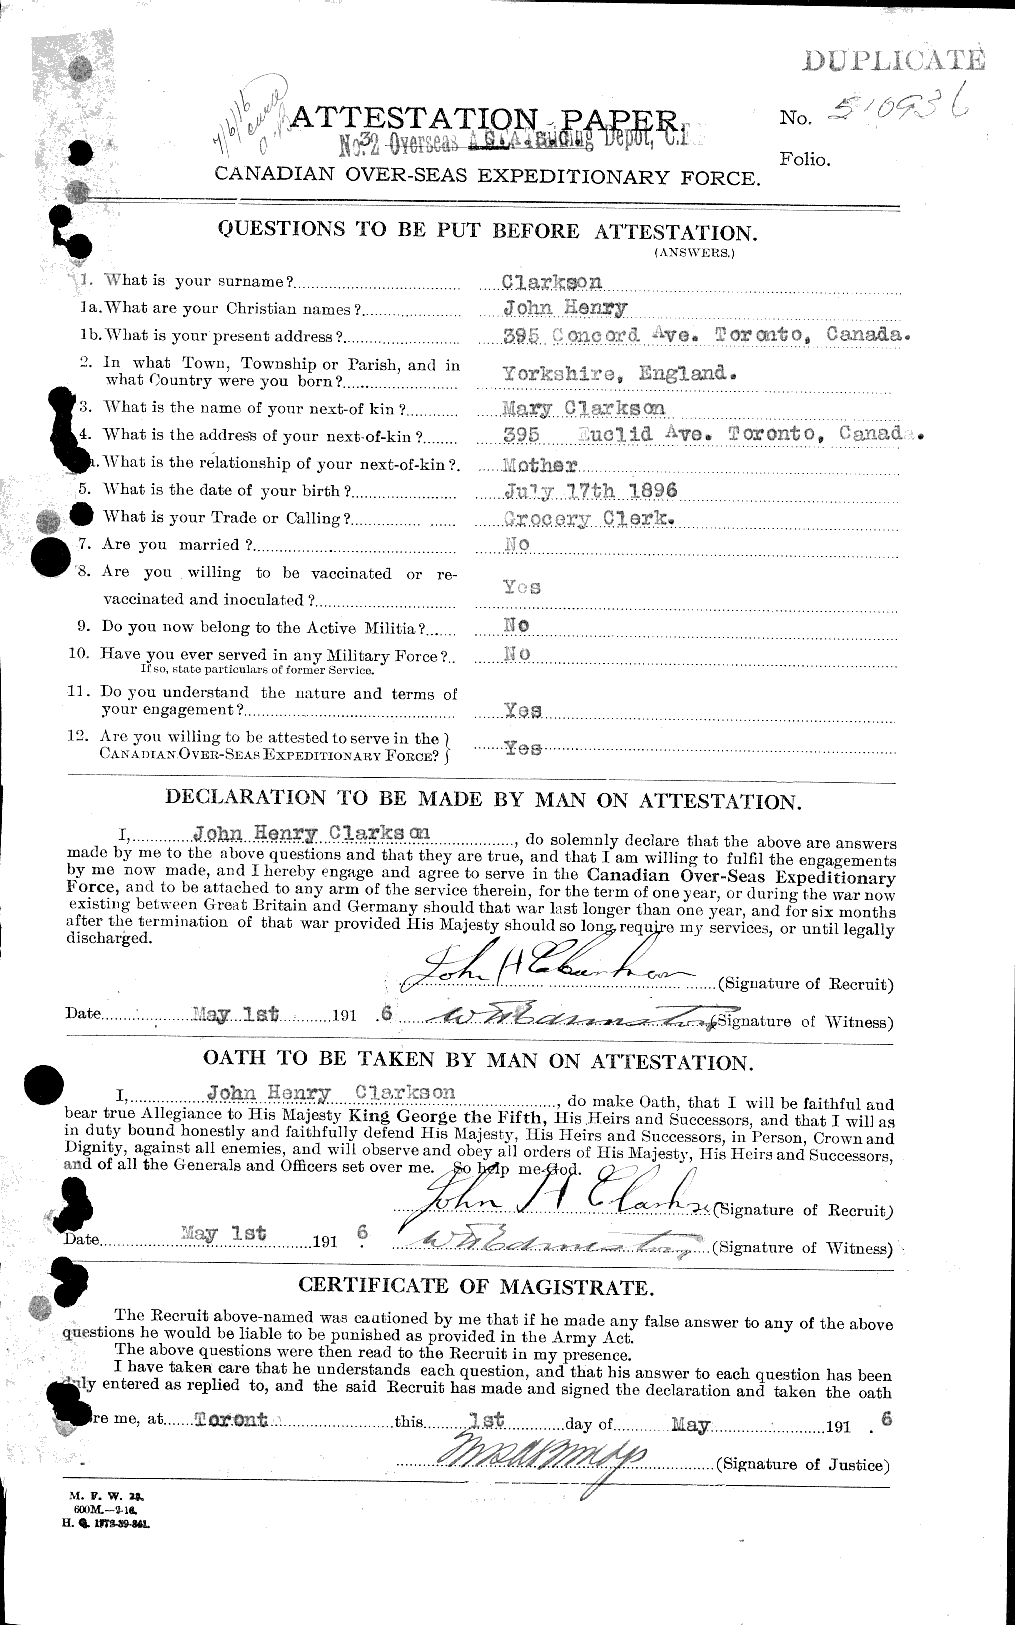 Personnel Records of the First World War - CEF 021457a